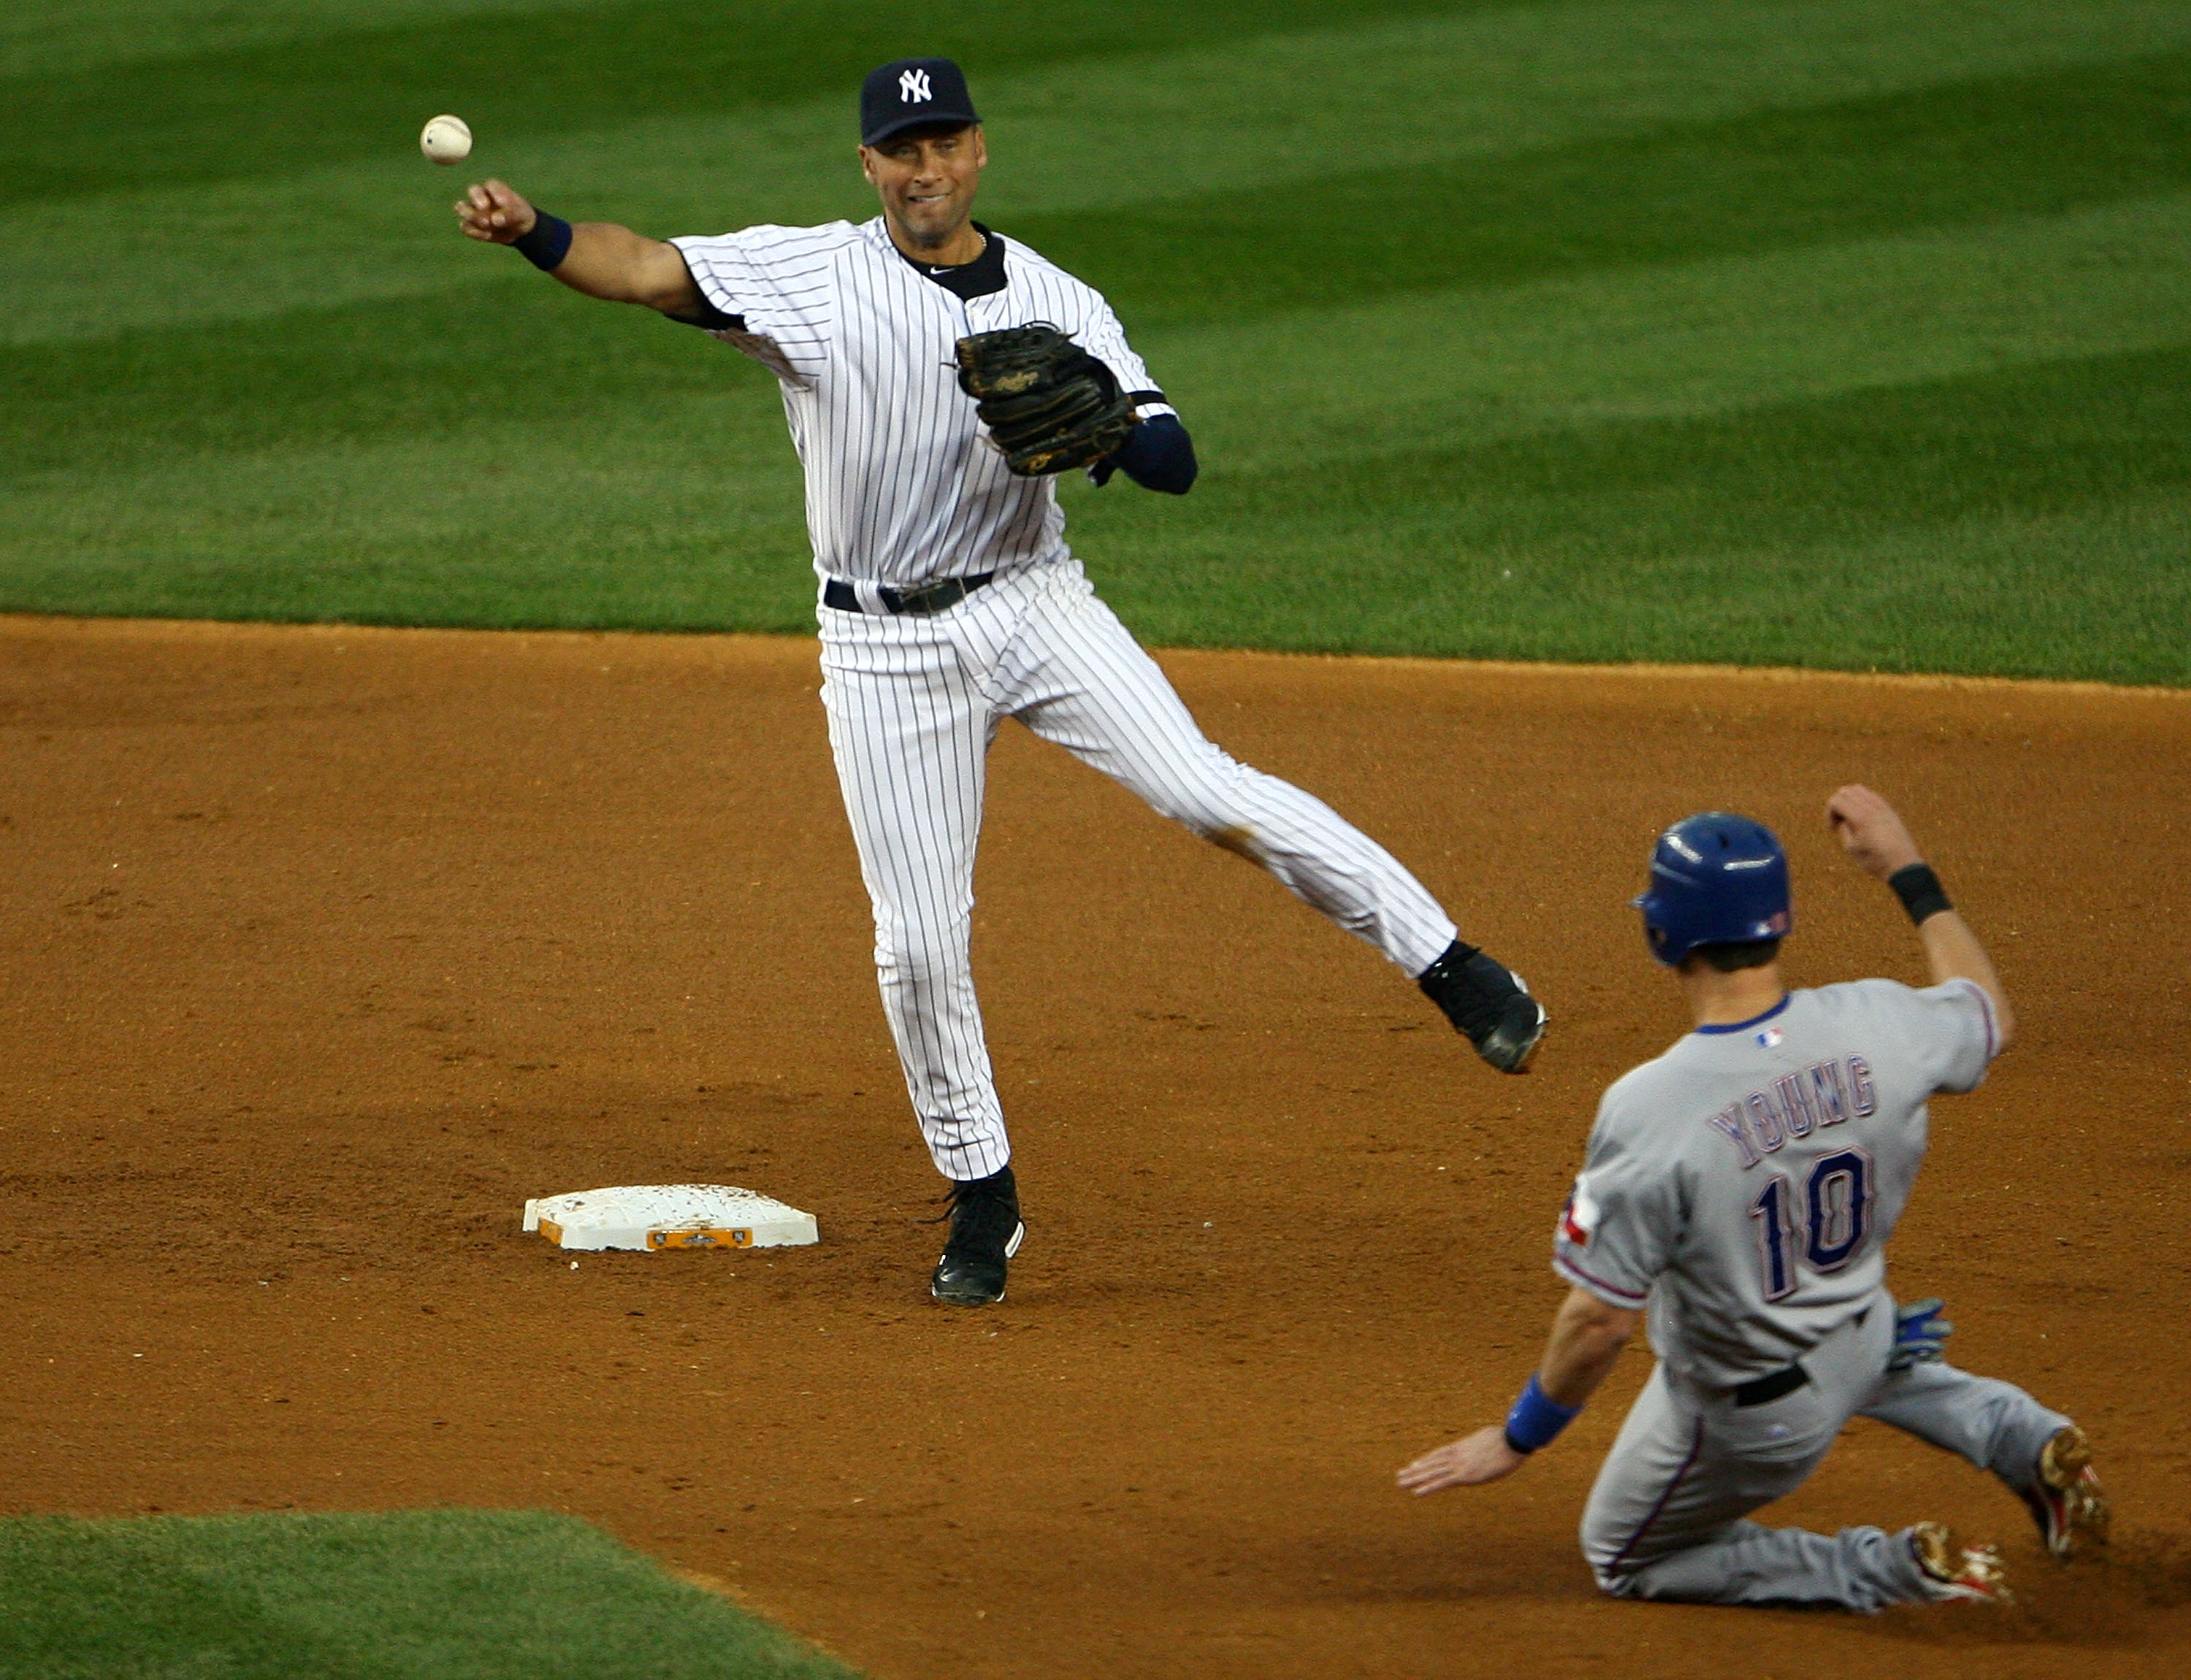 New York Yankees The 15 Greatest Defensive Players in Team History